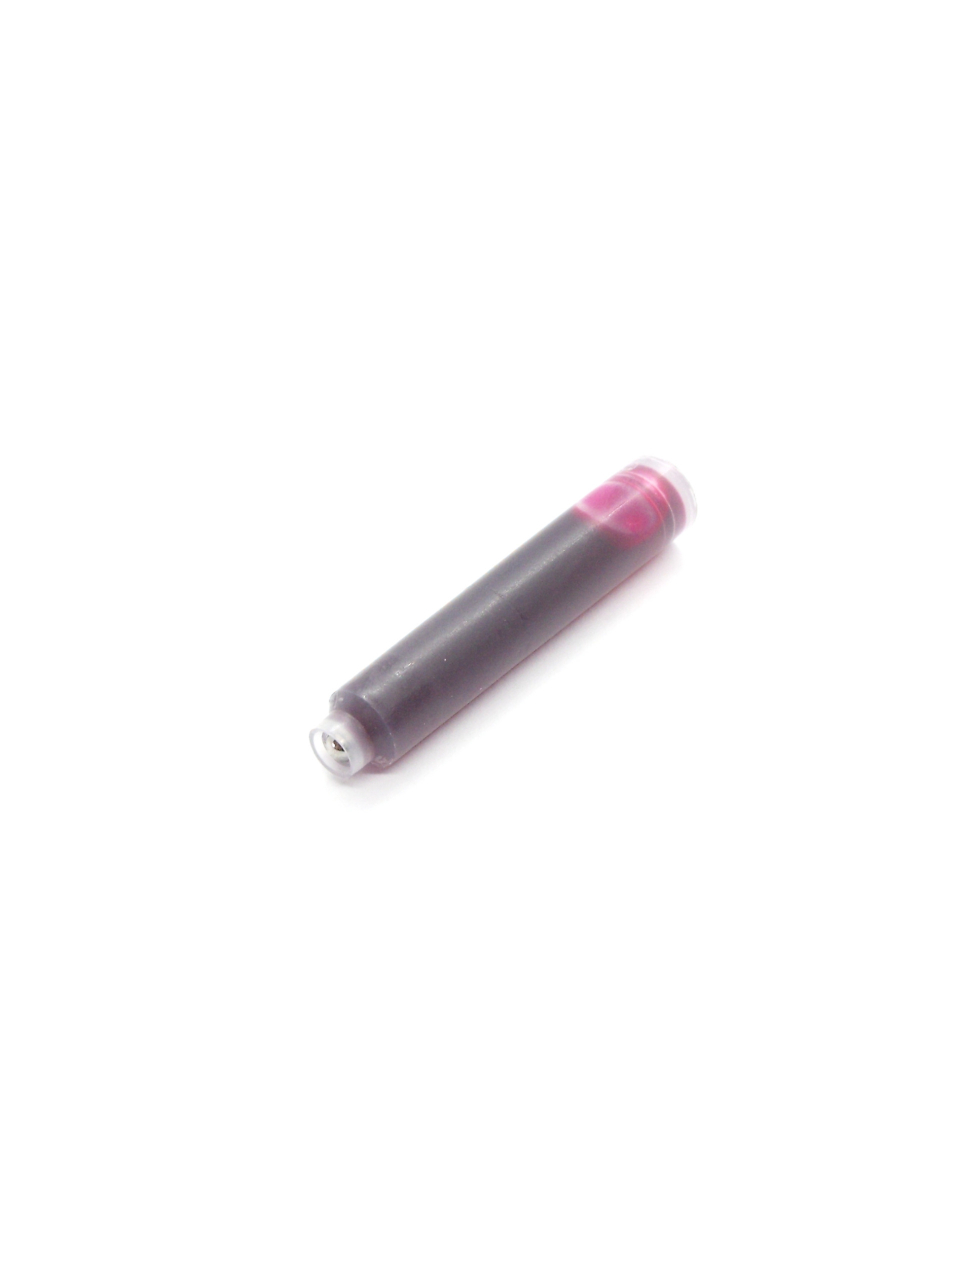 Cartridges For Reform Fountain Pens (Pink)